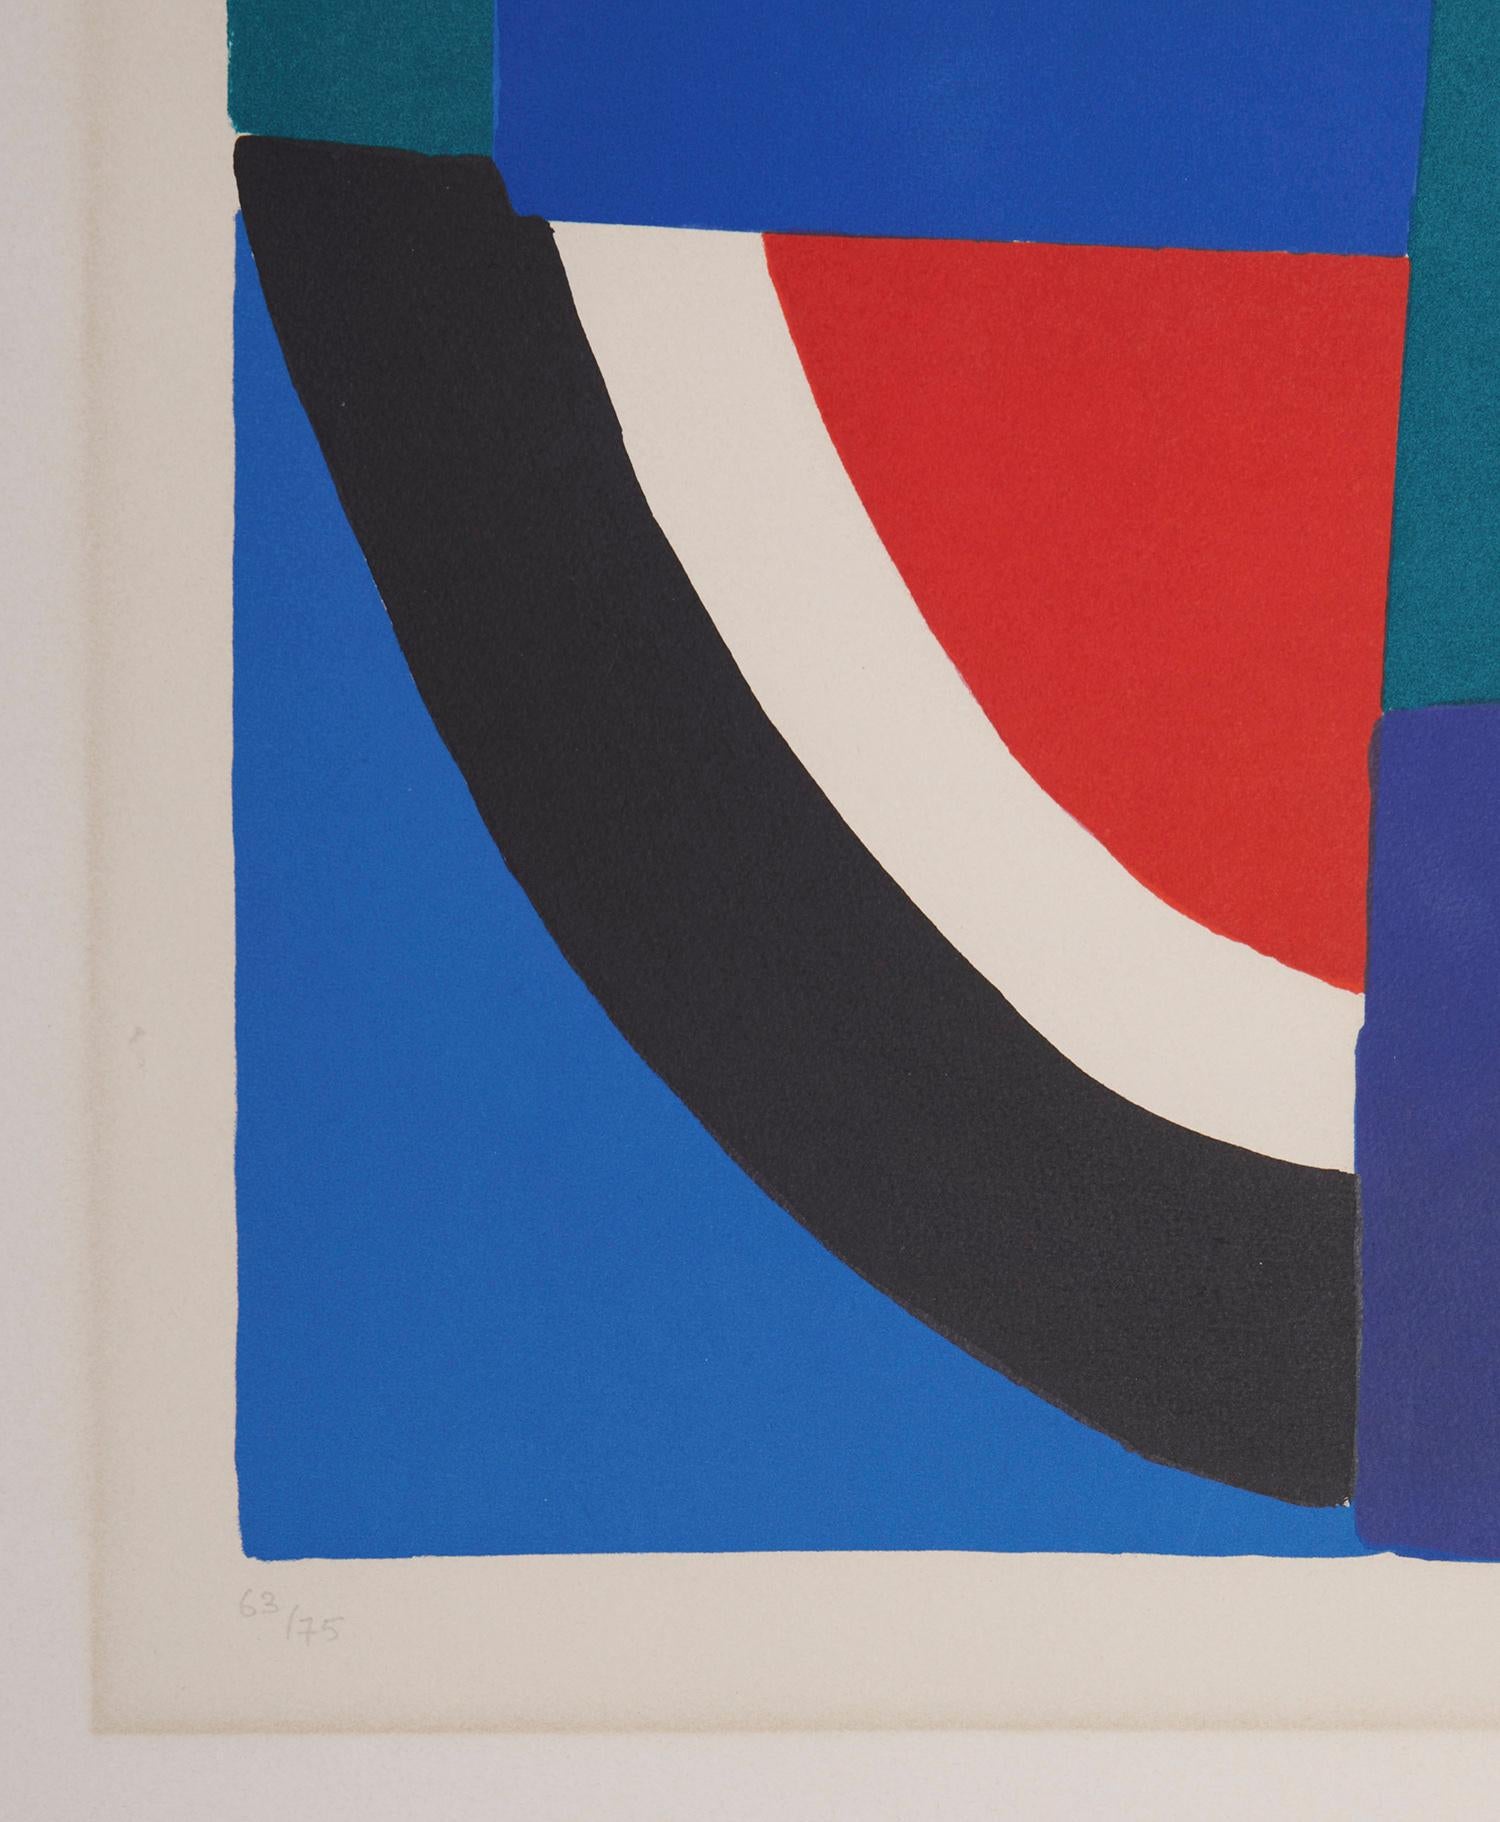 French Lithography by Sonia Delaunay edition of 75 ex For Sale